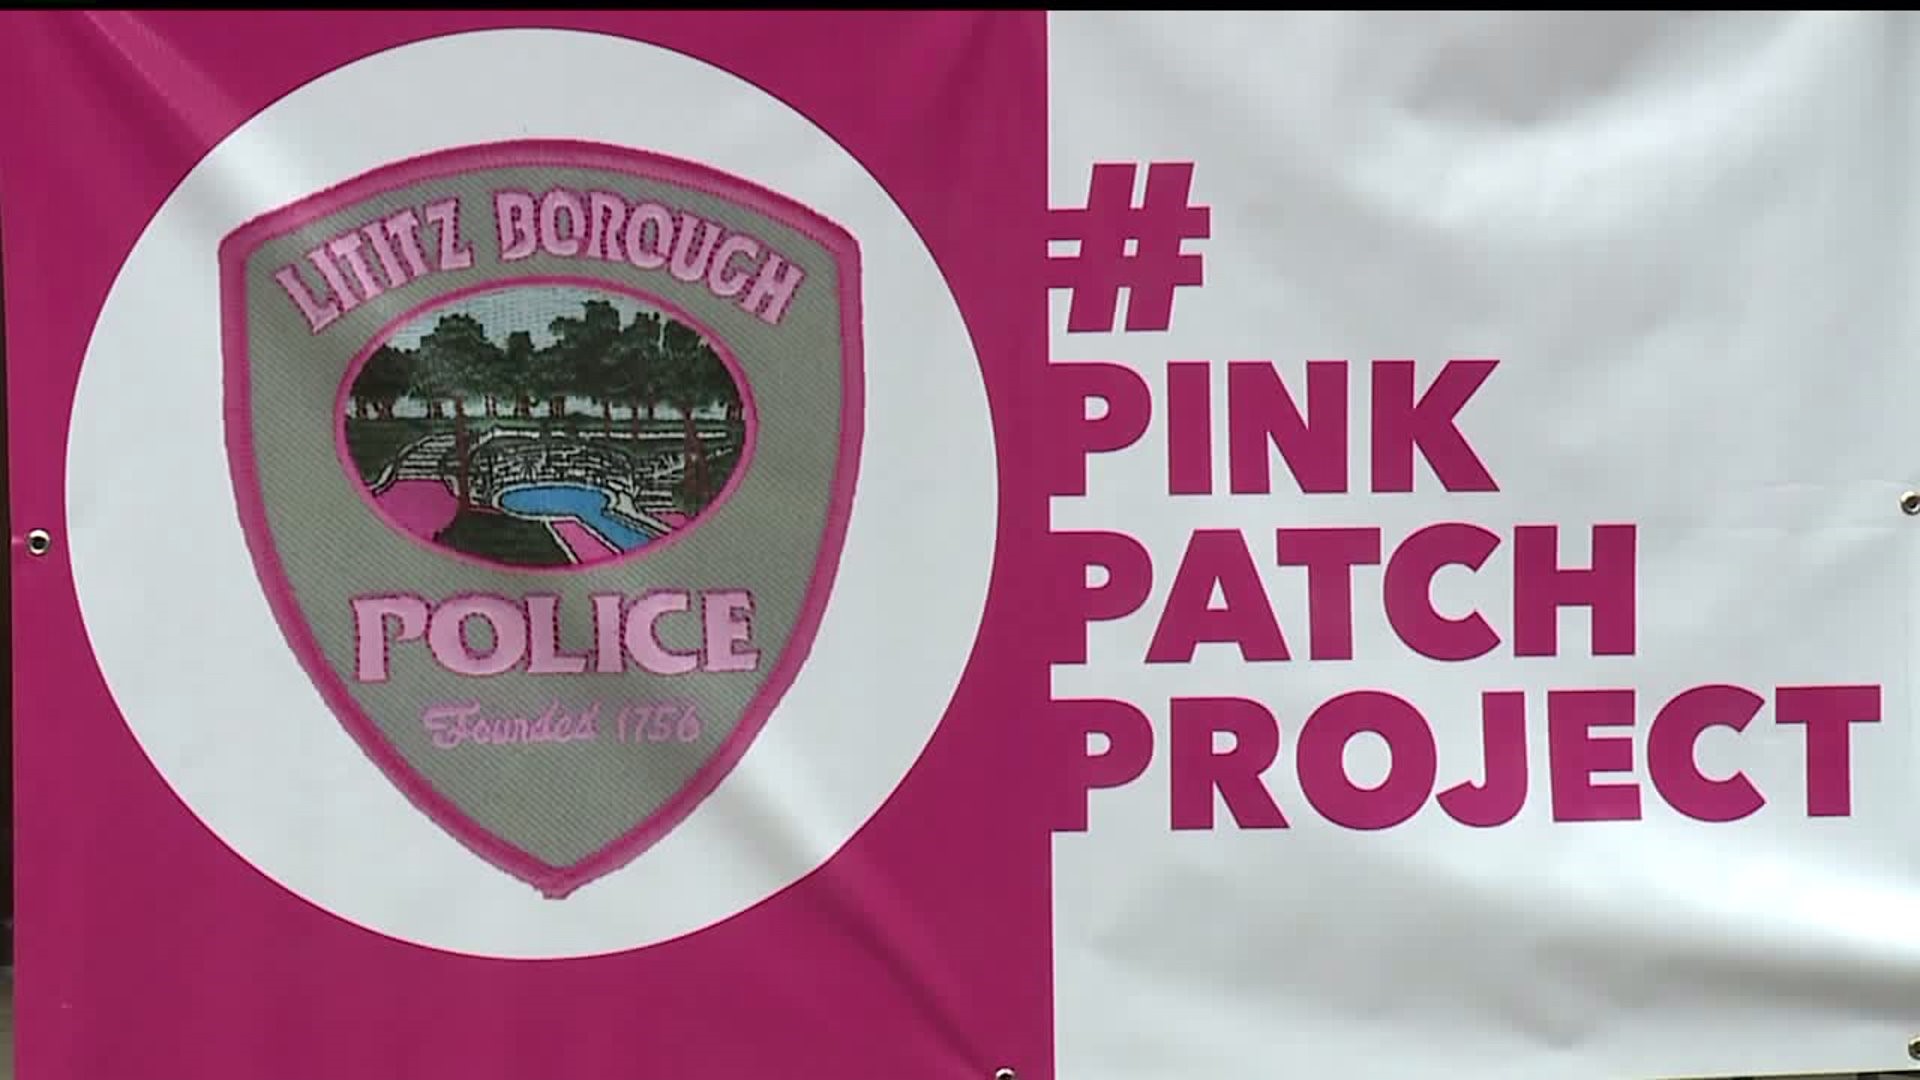 Local police go pink for breast cancer